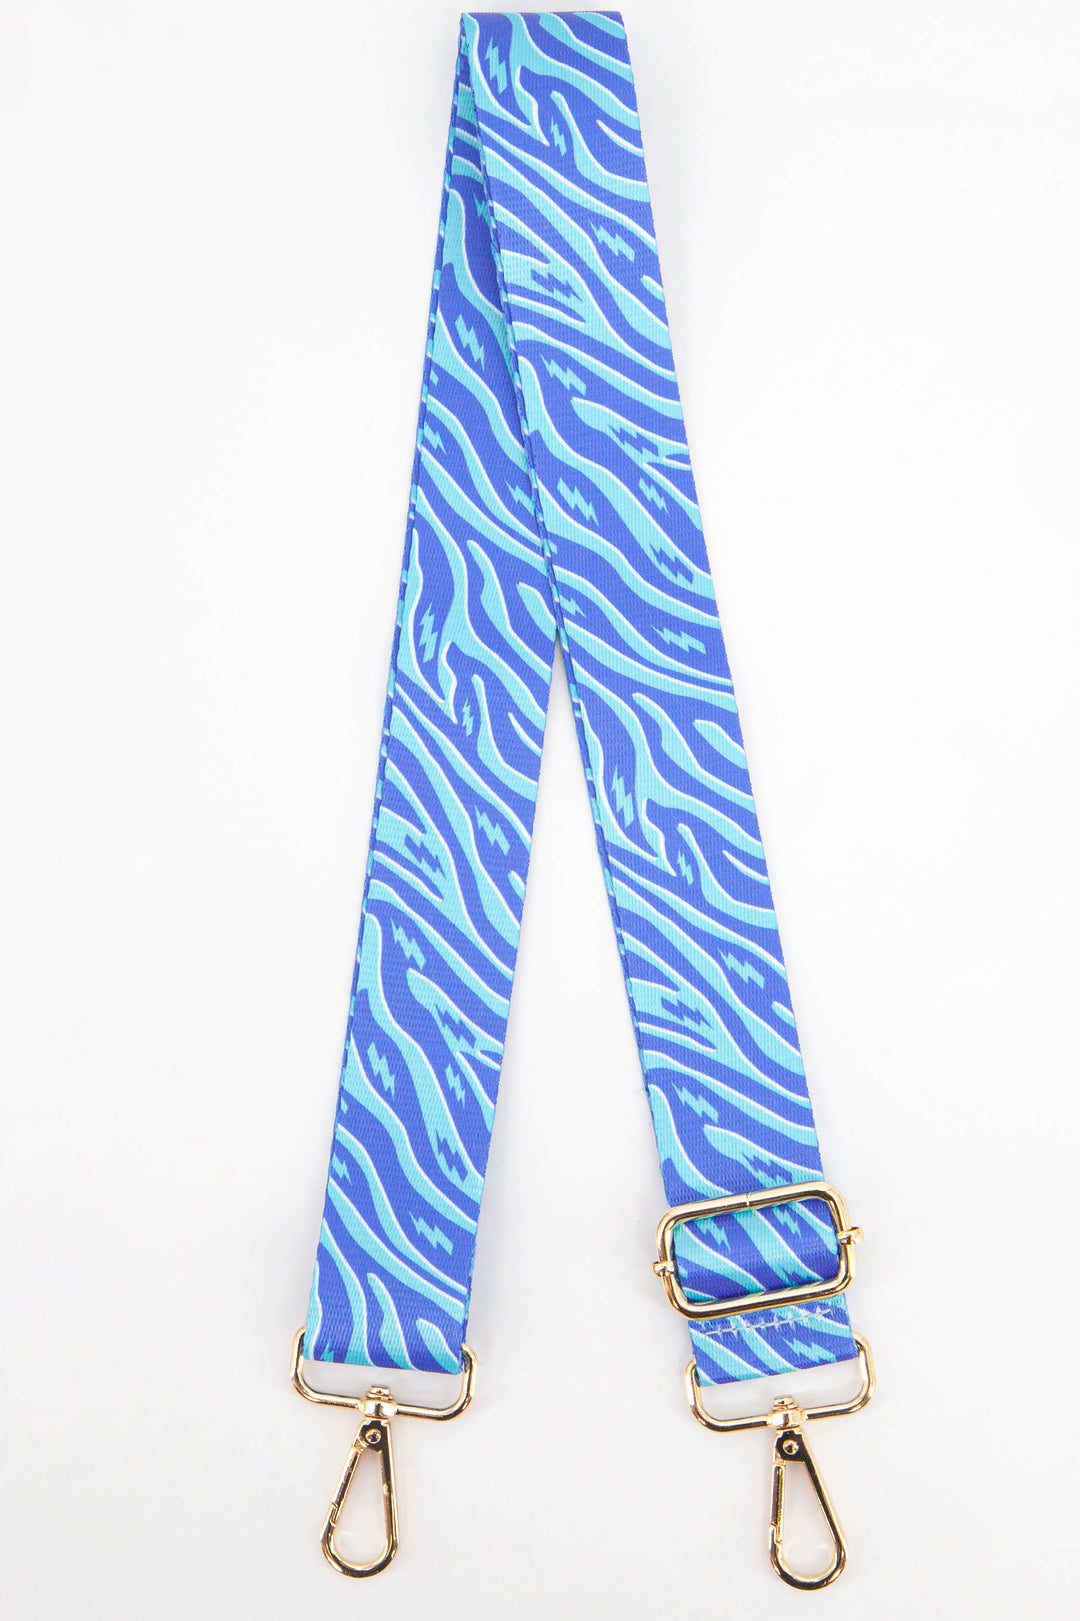 blue and turquoise zebra and lightning bolt pattern detachable bag strap with gold hardware